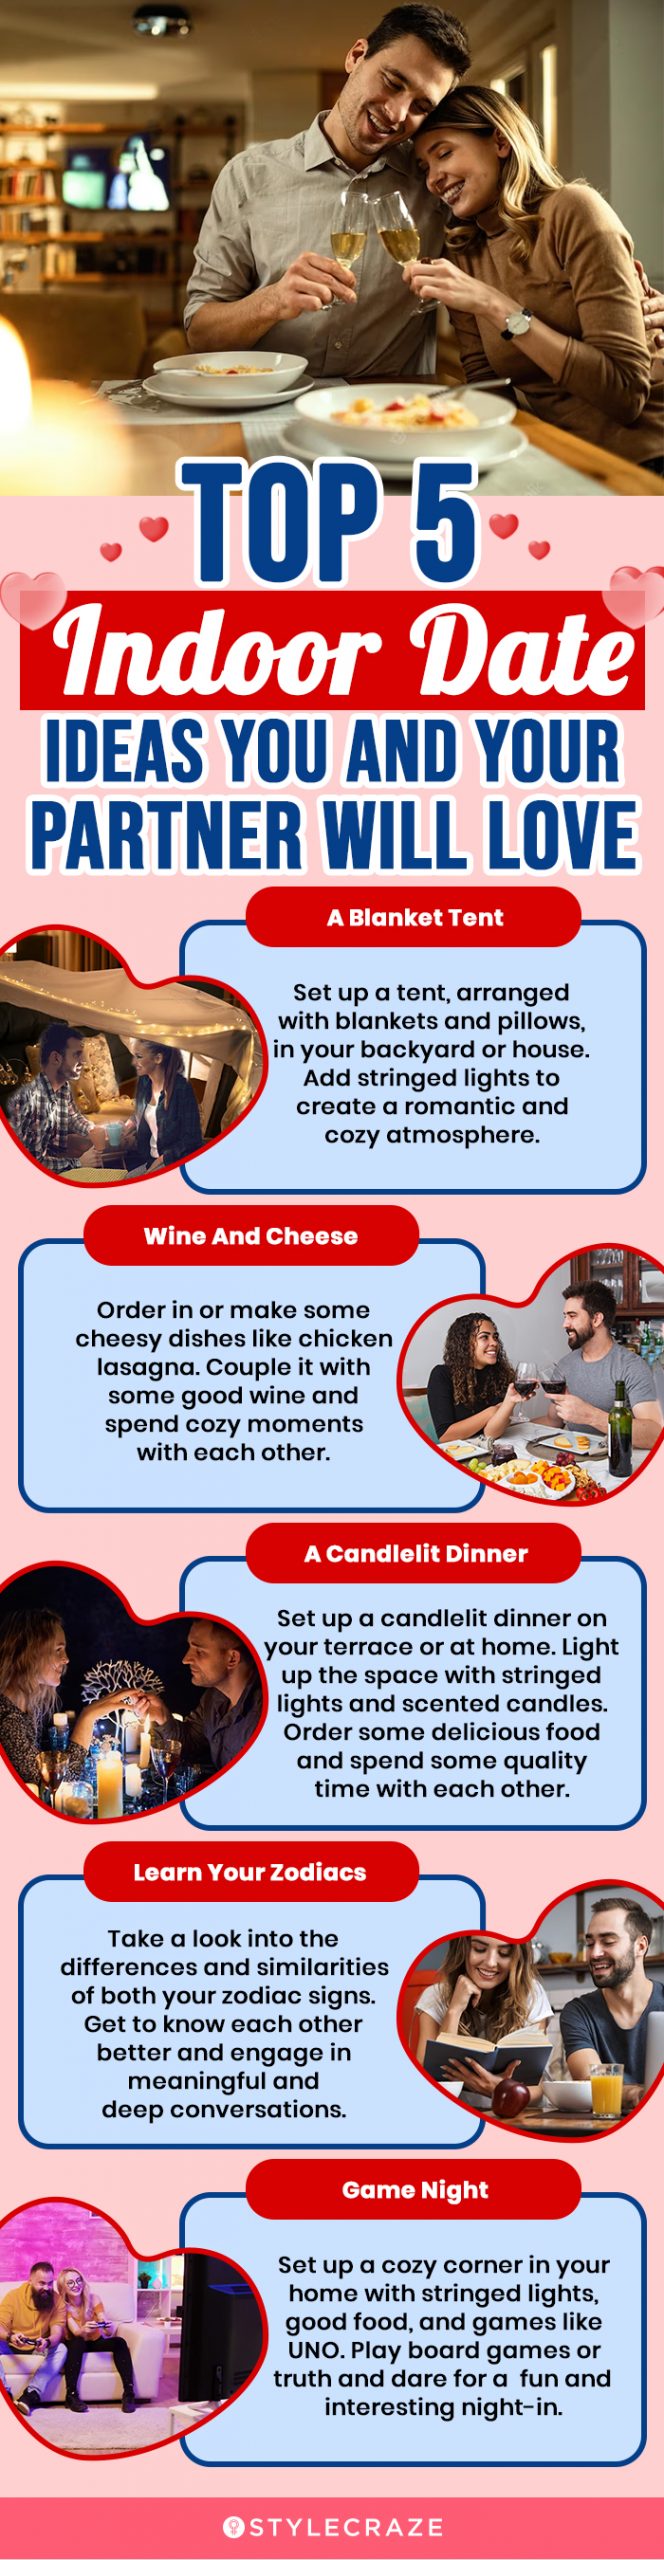 10 Romantic Date Night Ideas for Married Couples